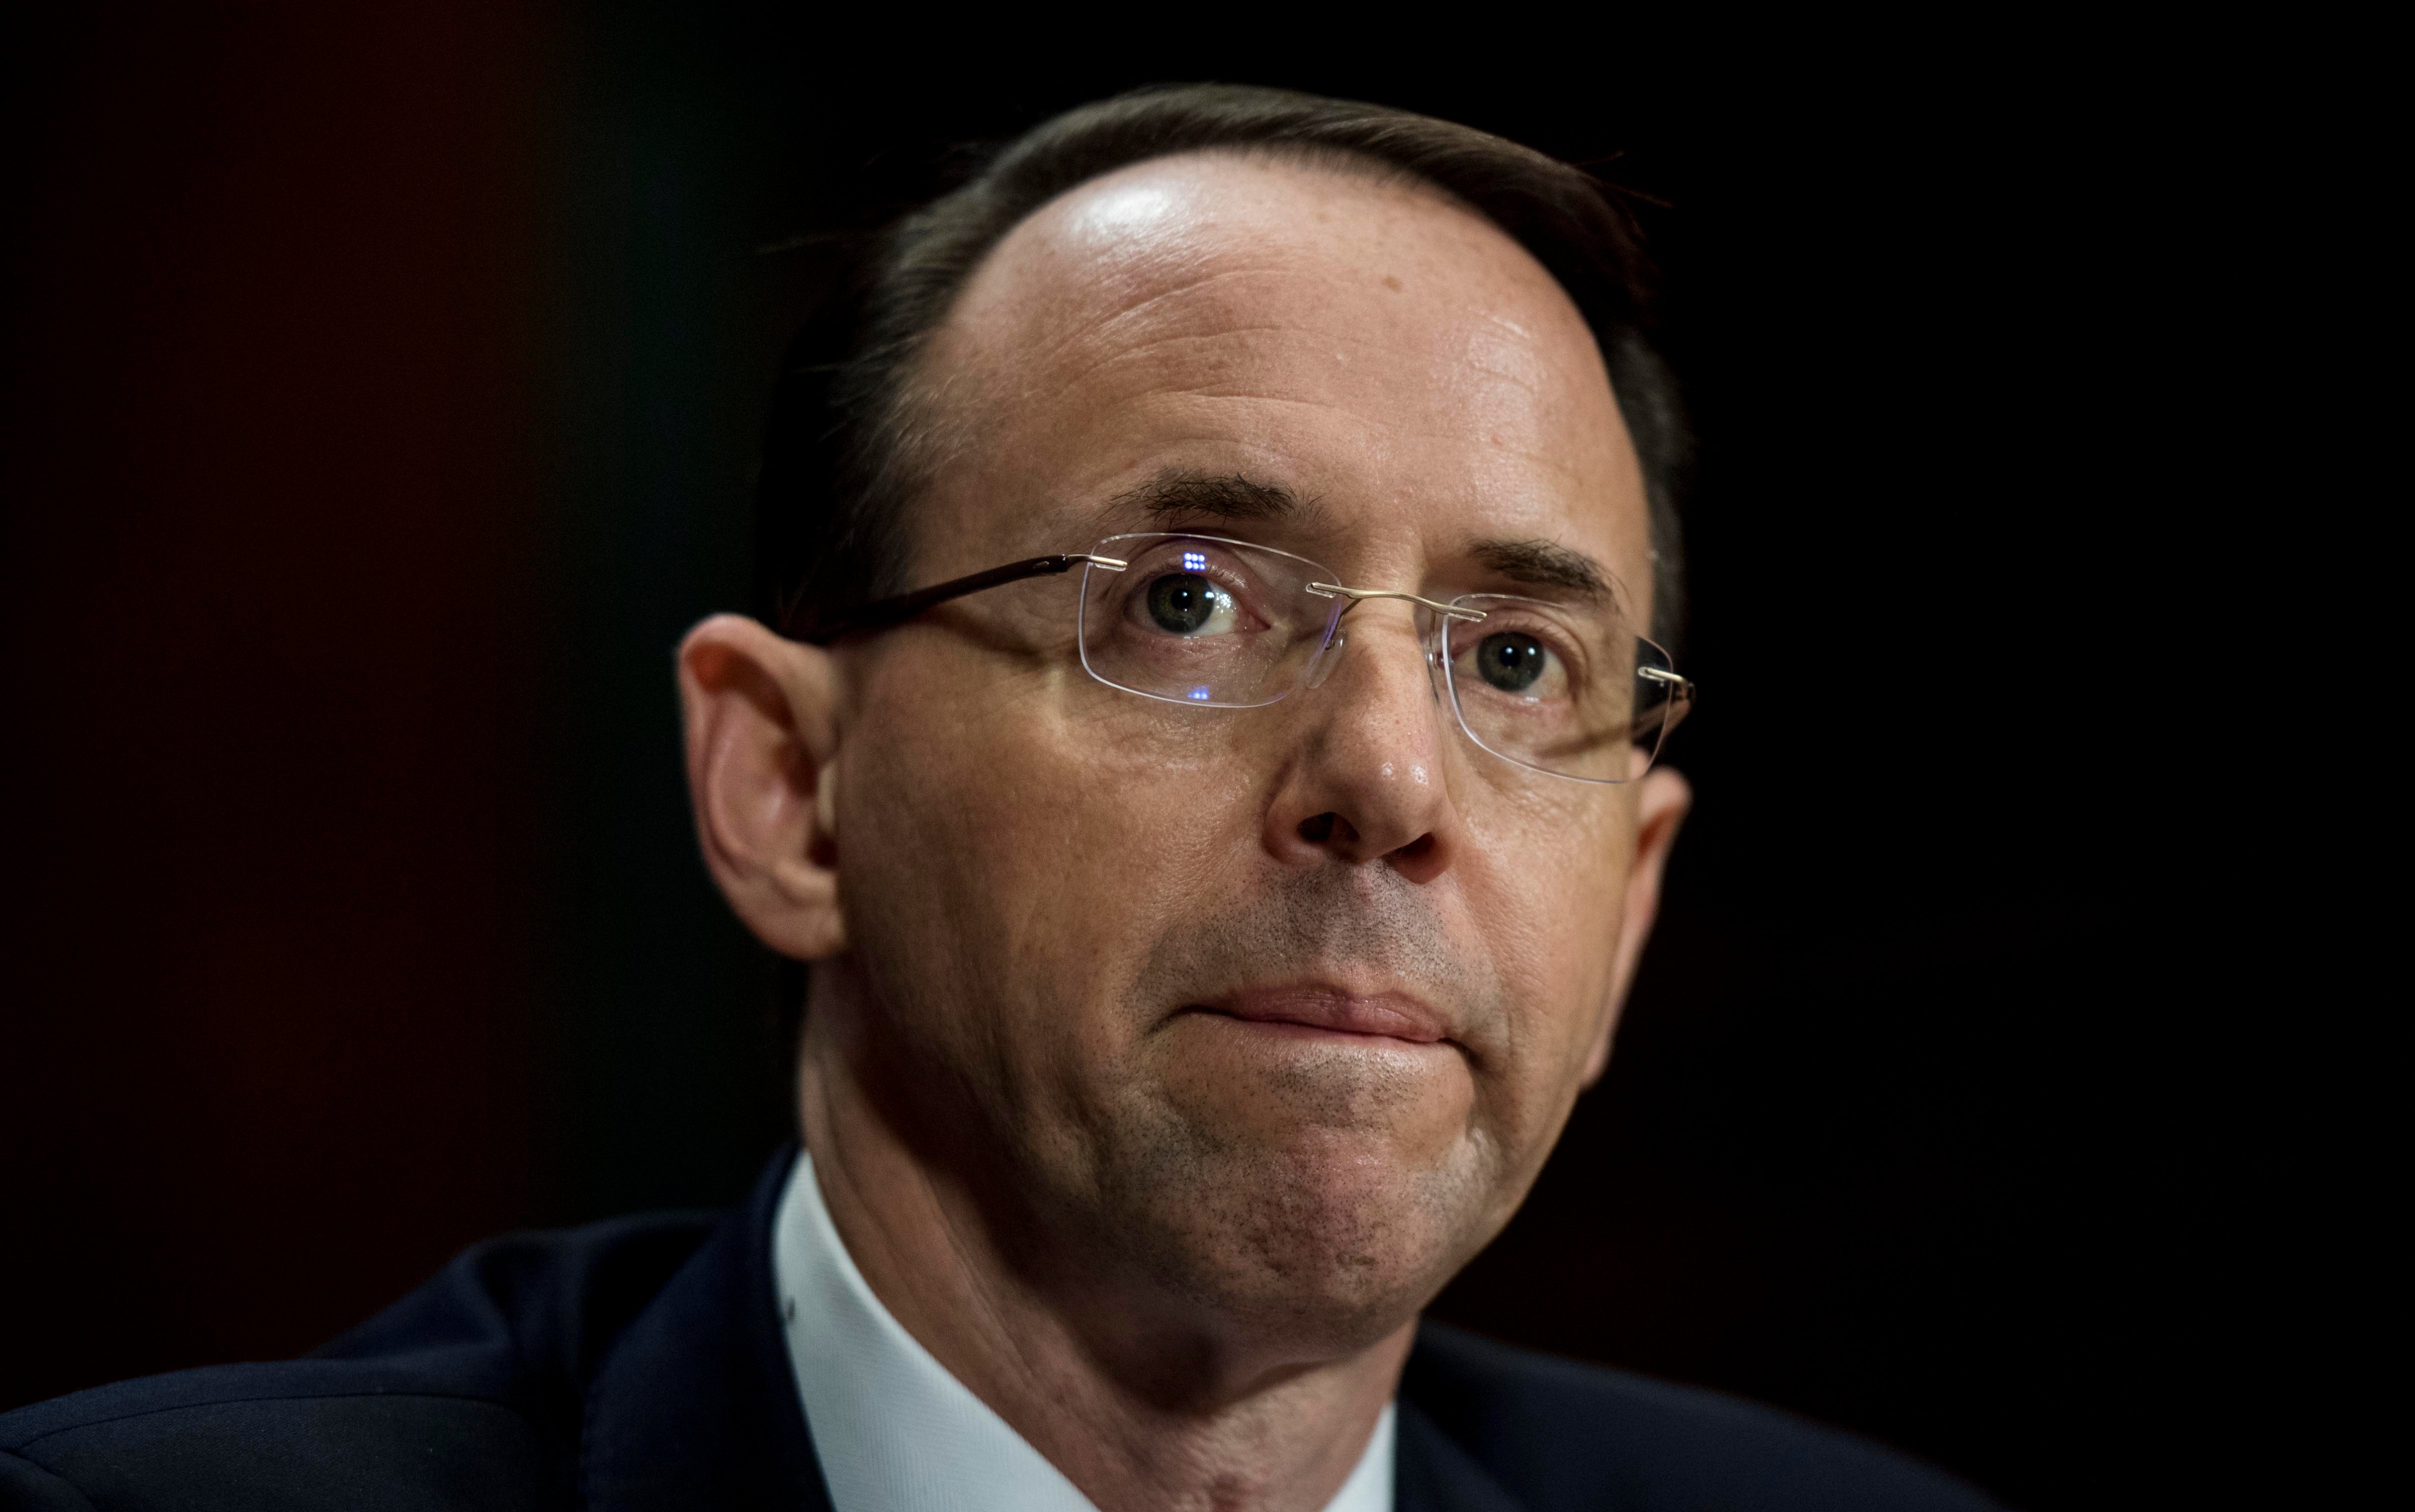 Deputy Attorney General Rod Rosenstein appears before the Senate Judiciary Committee on Capitol Hill in Washington, DC, March 7, 2017. (Melina Mara—The Washington Post/Getty Images)